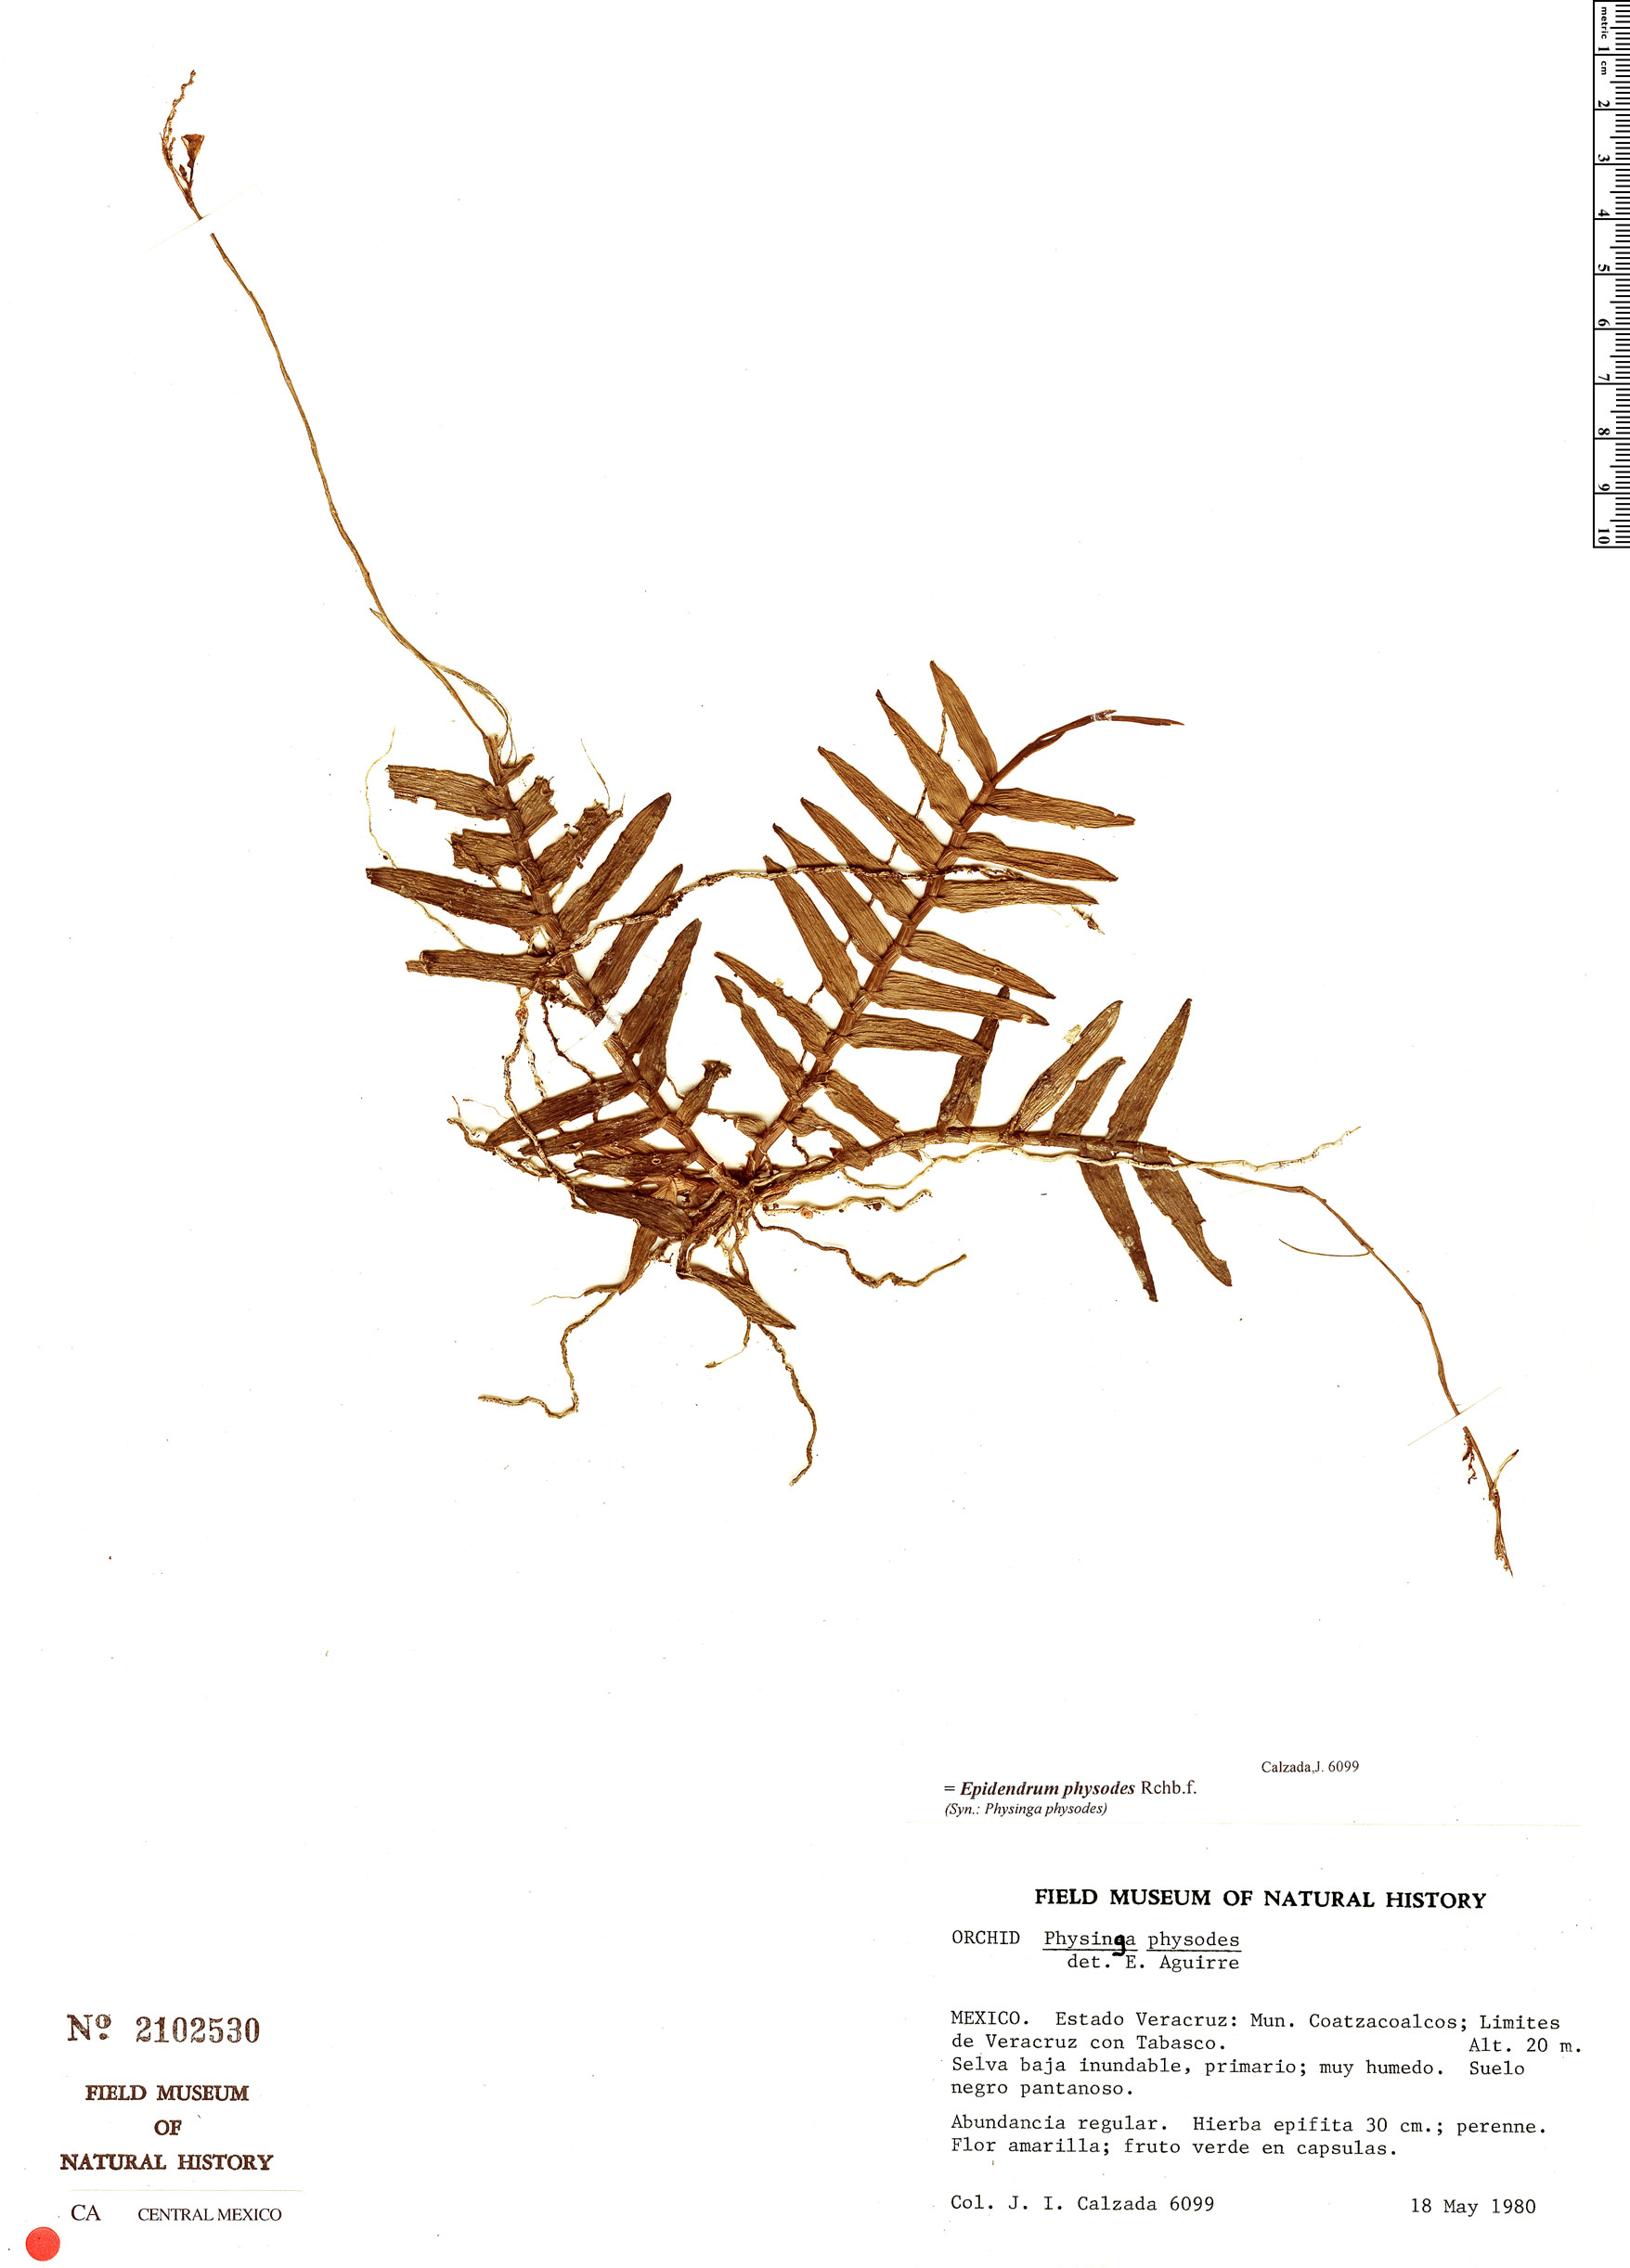 Epidendrum physodes image